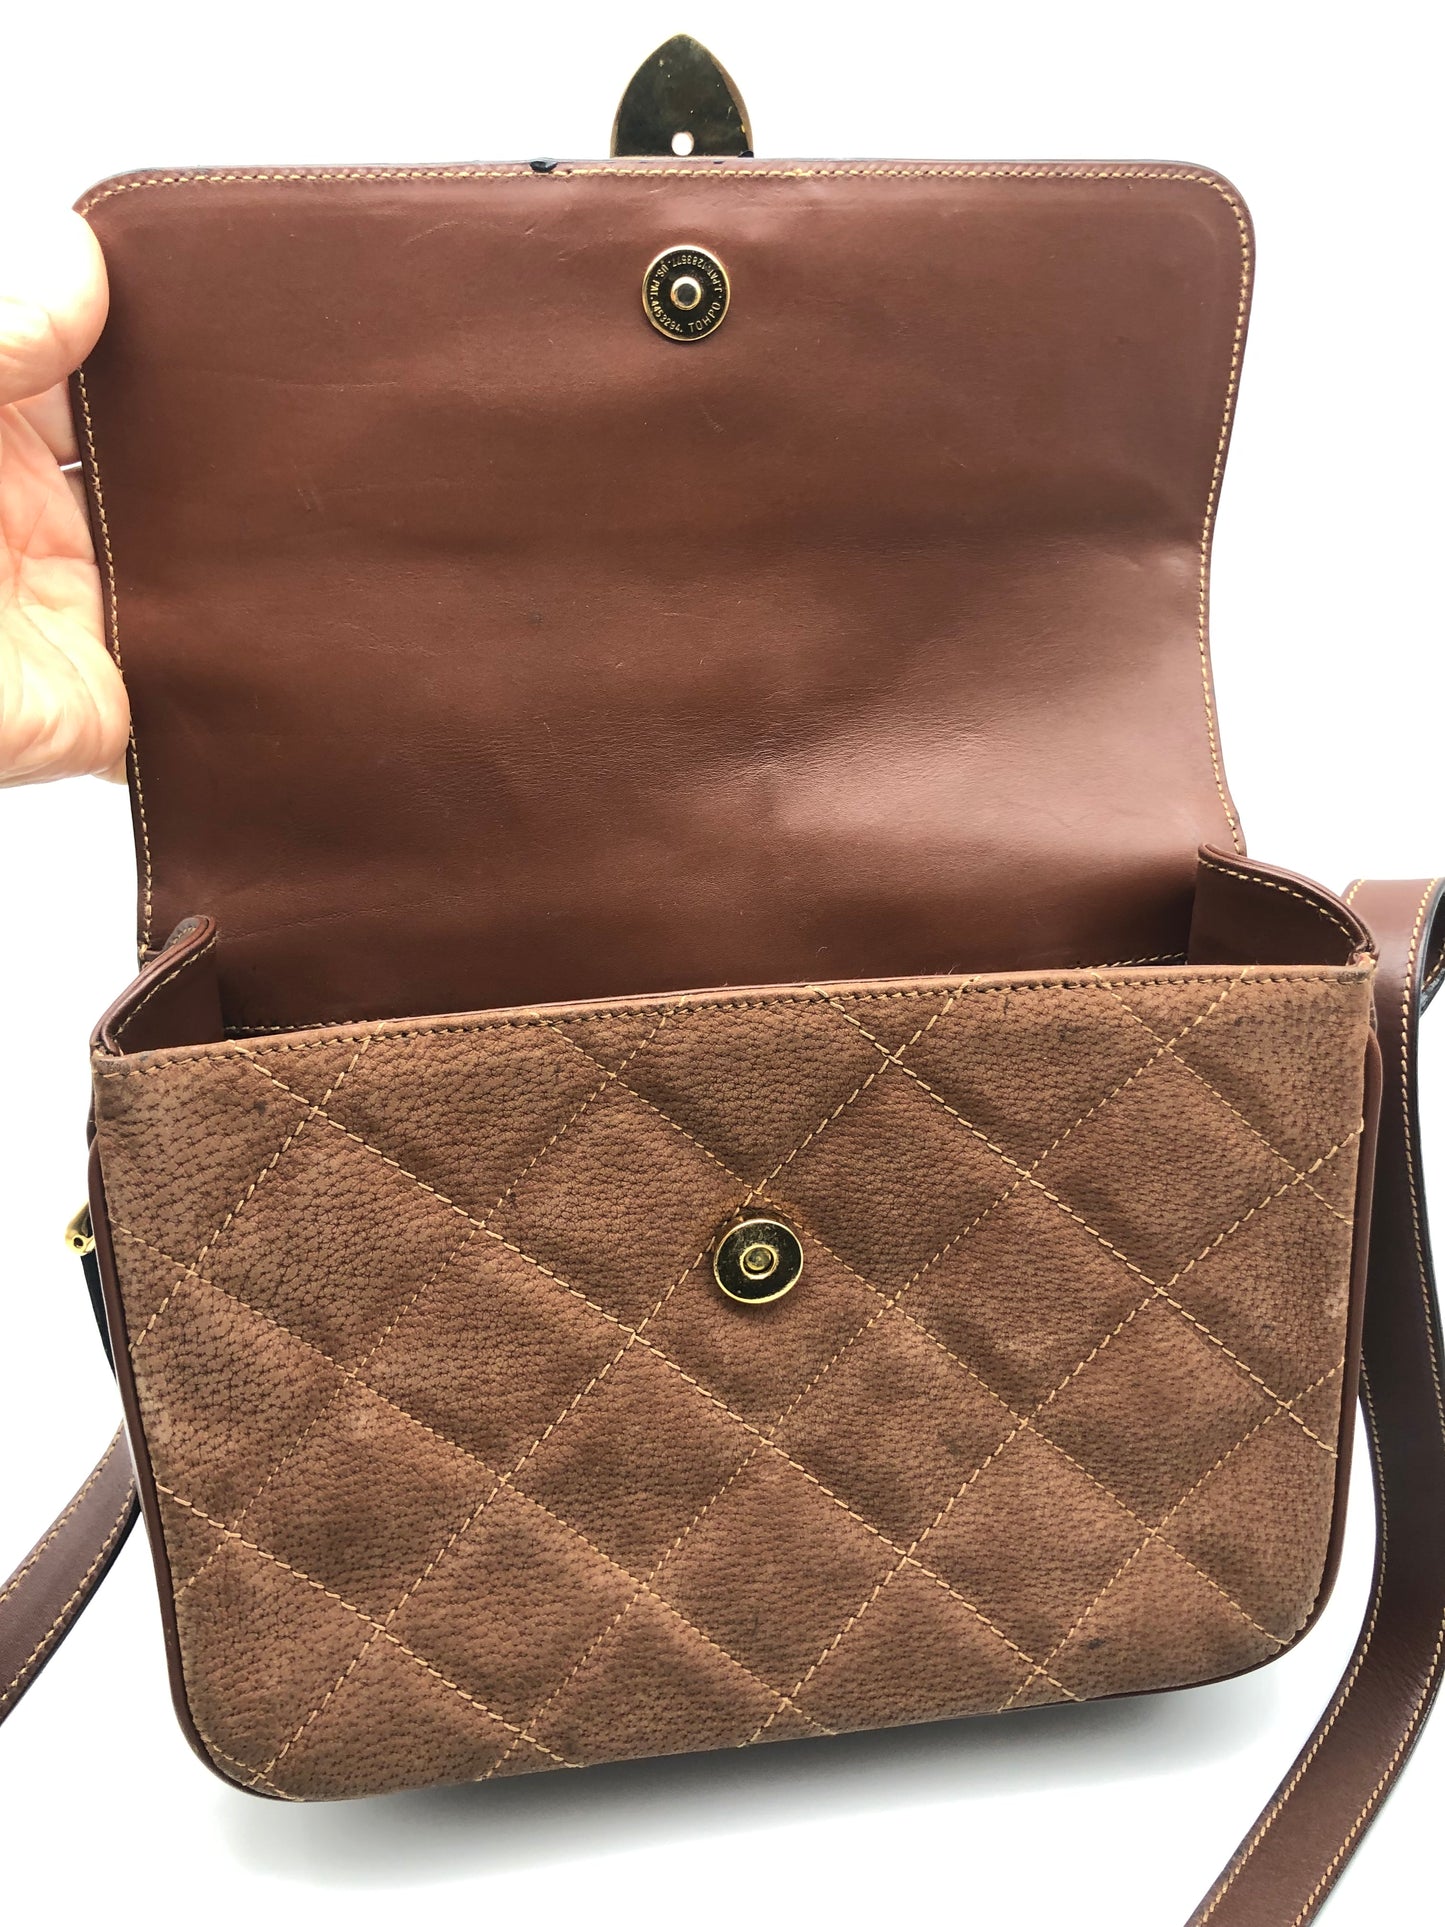 Authentic Gucci Brown Quilted Suede Box Shape Shoulder Crossbody Bag